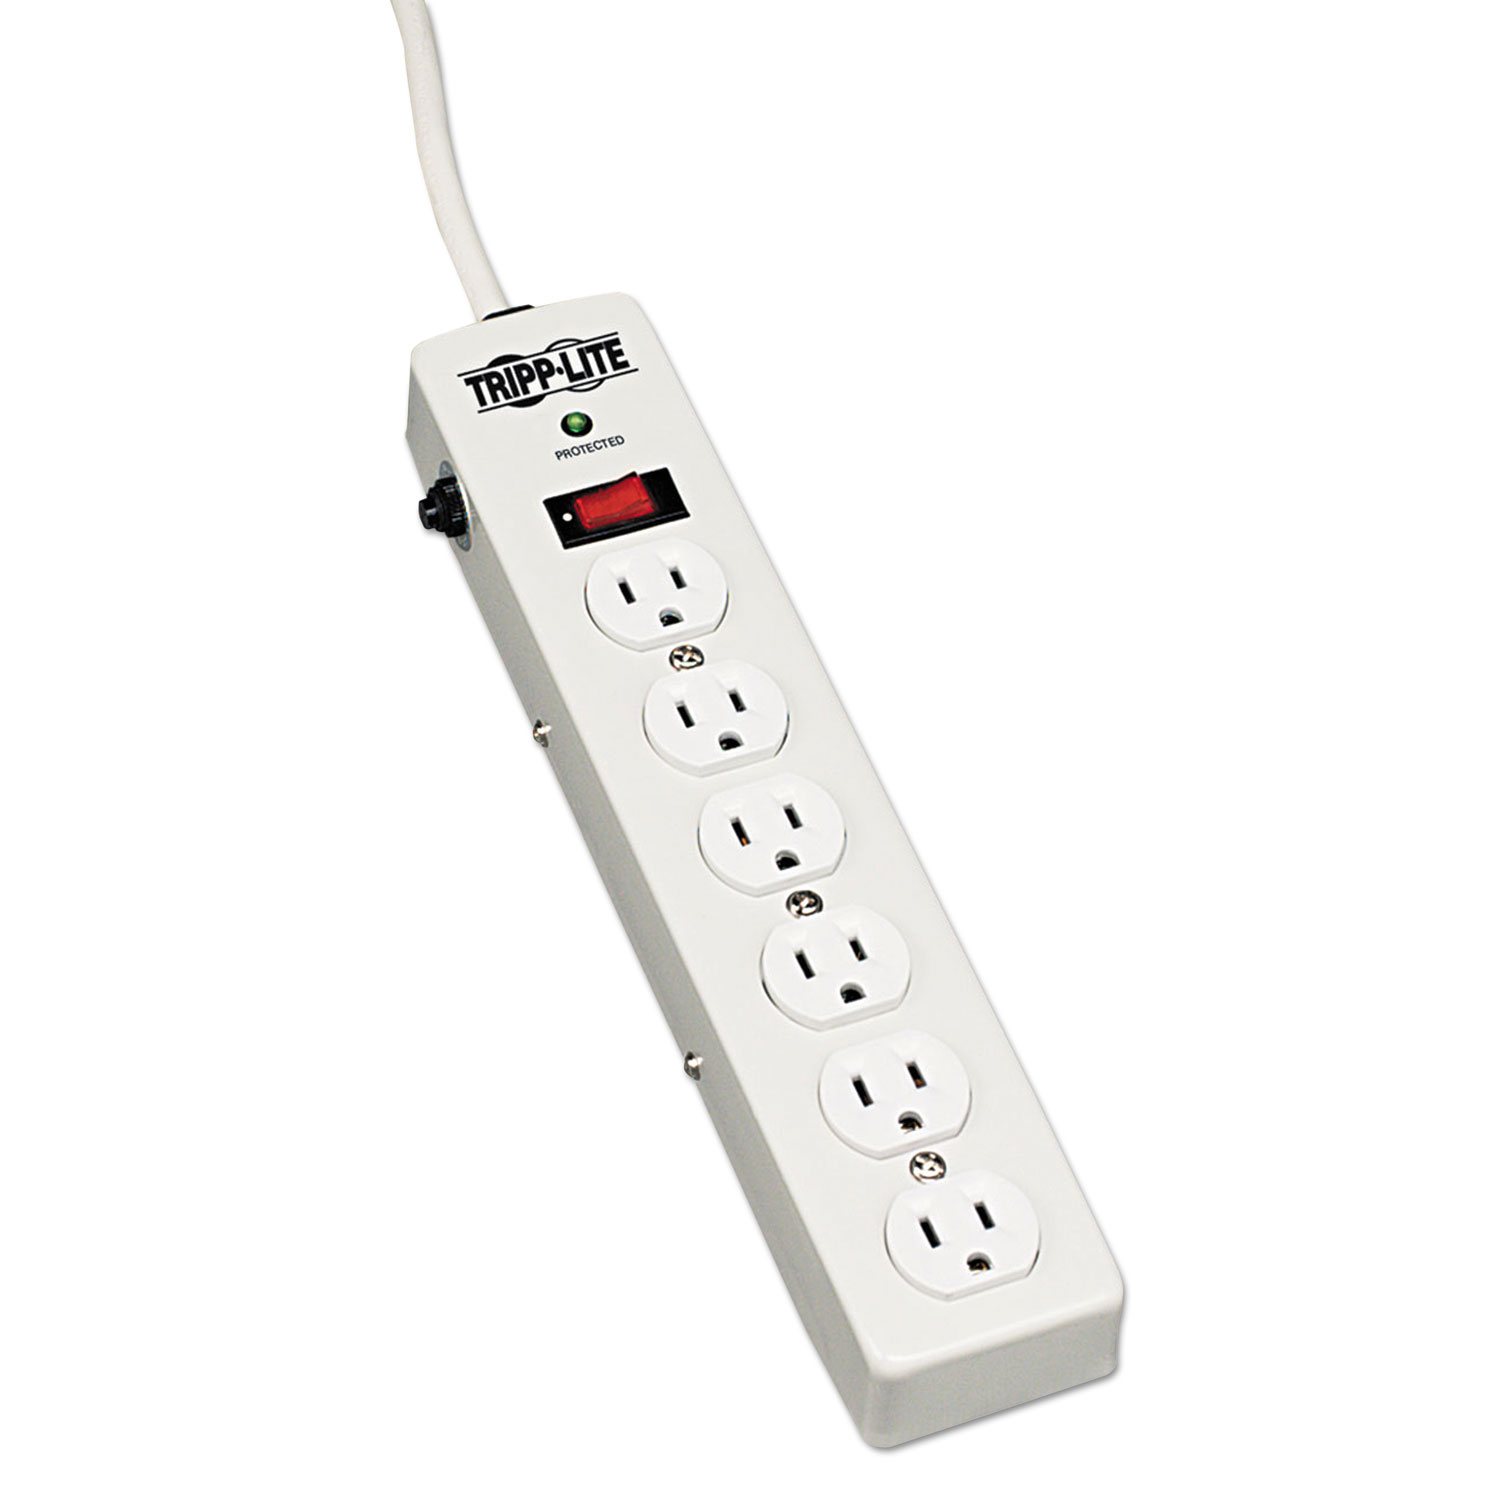  Tripp Lite TLM606HJ Protect It! Surge Protector, 6 Outlets, 6 ft. Cord, 1340 Joules, Light Gray (TRPTLM606HJ) 